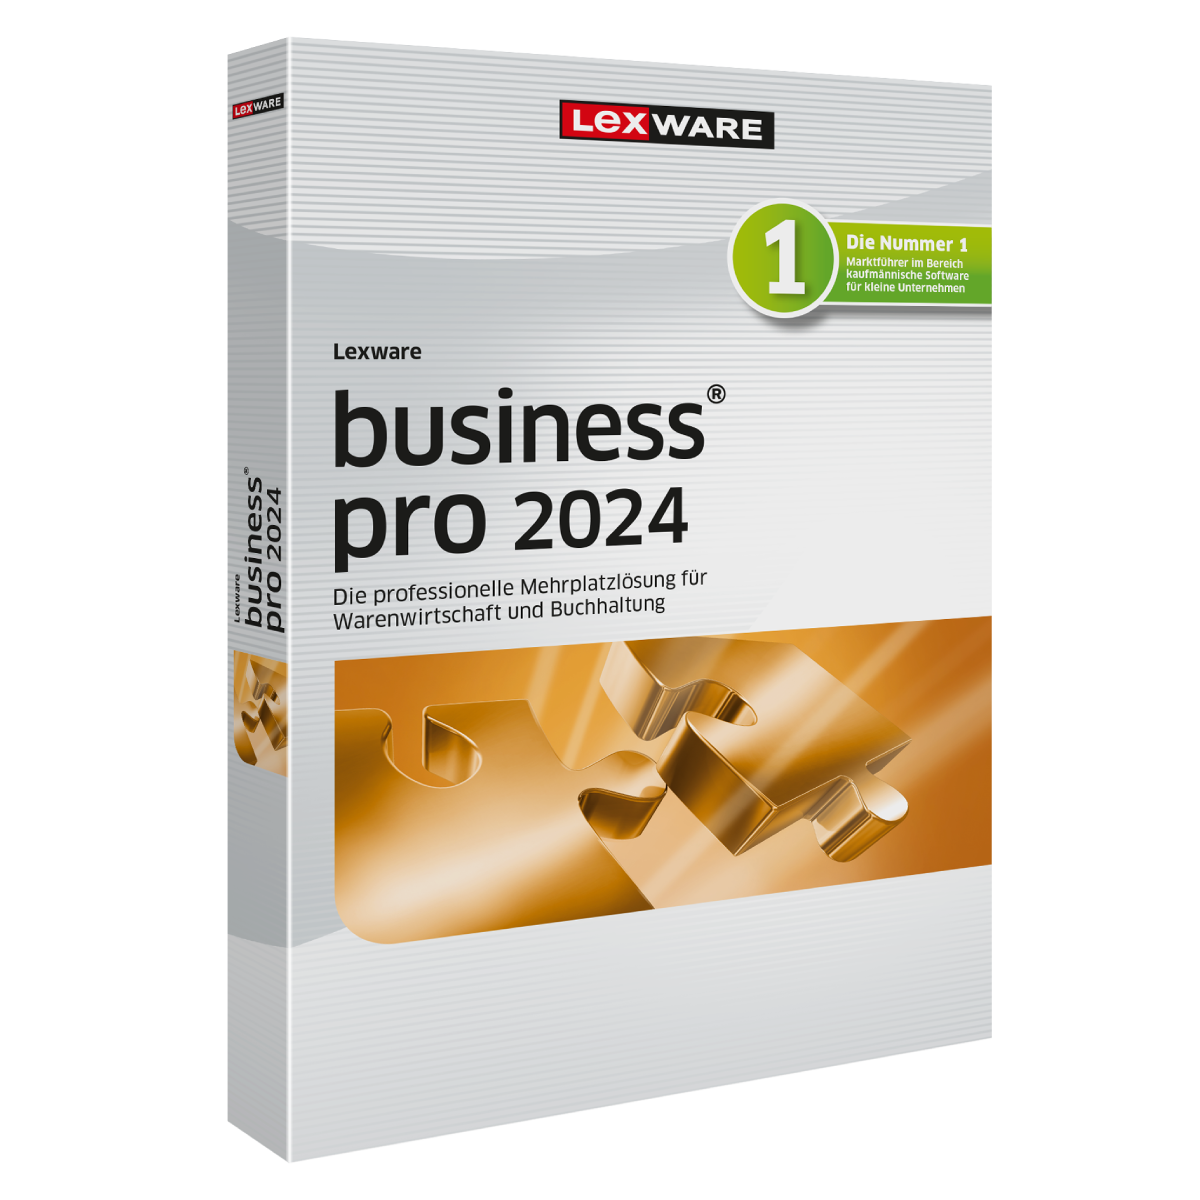 LEXWARE business pro 2024 - Abo [Download]